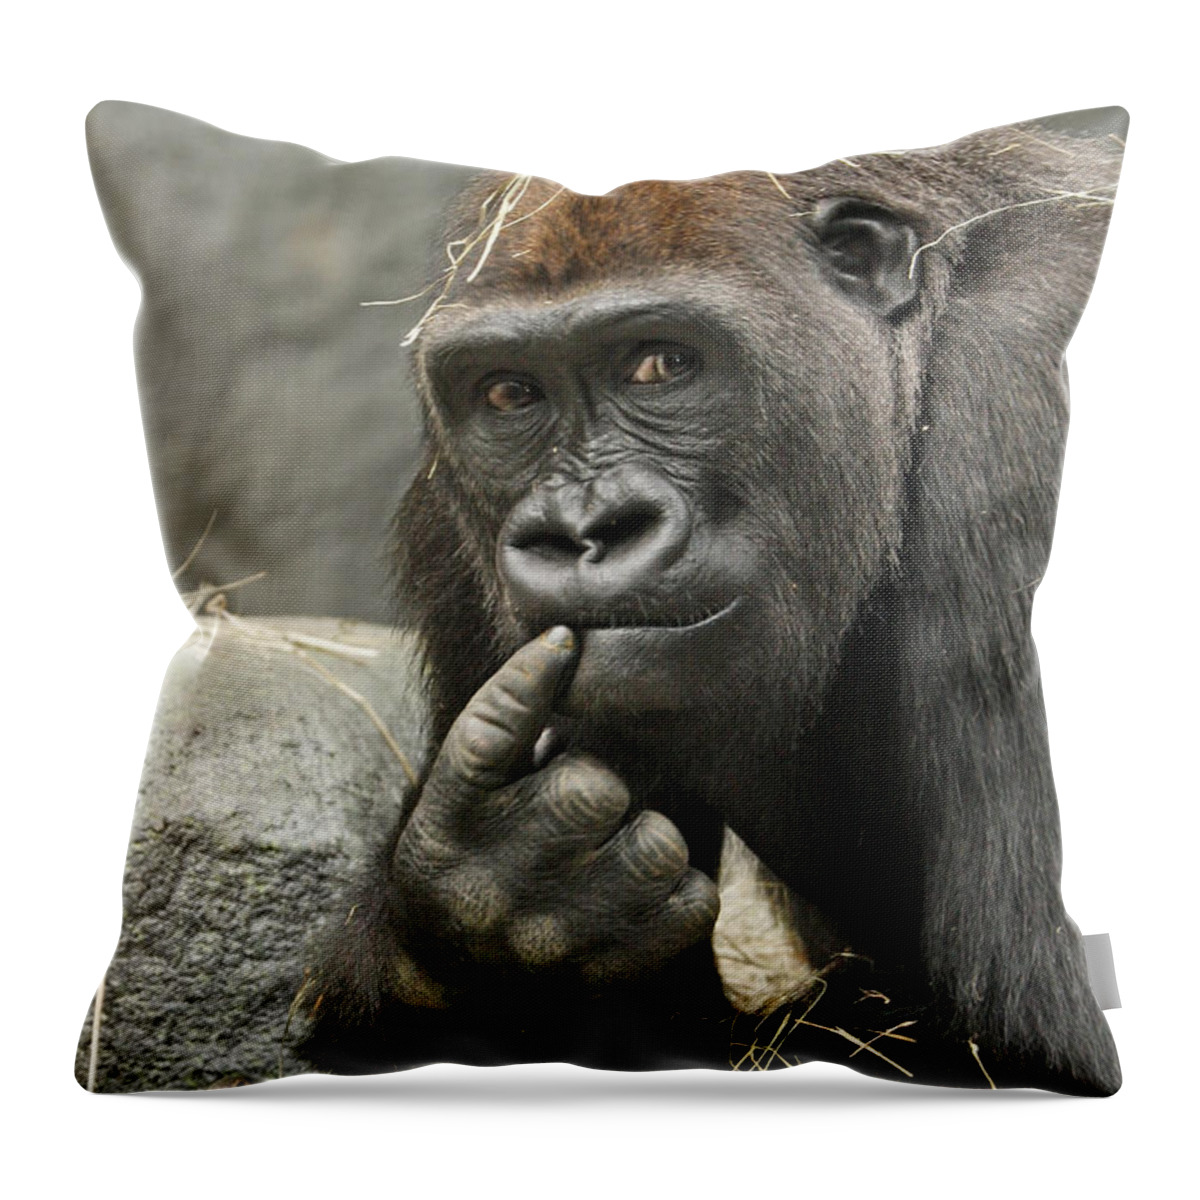 Gorilla Throw Pillow featuring the photograph Thinking It Over by Patty Colabuono